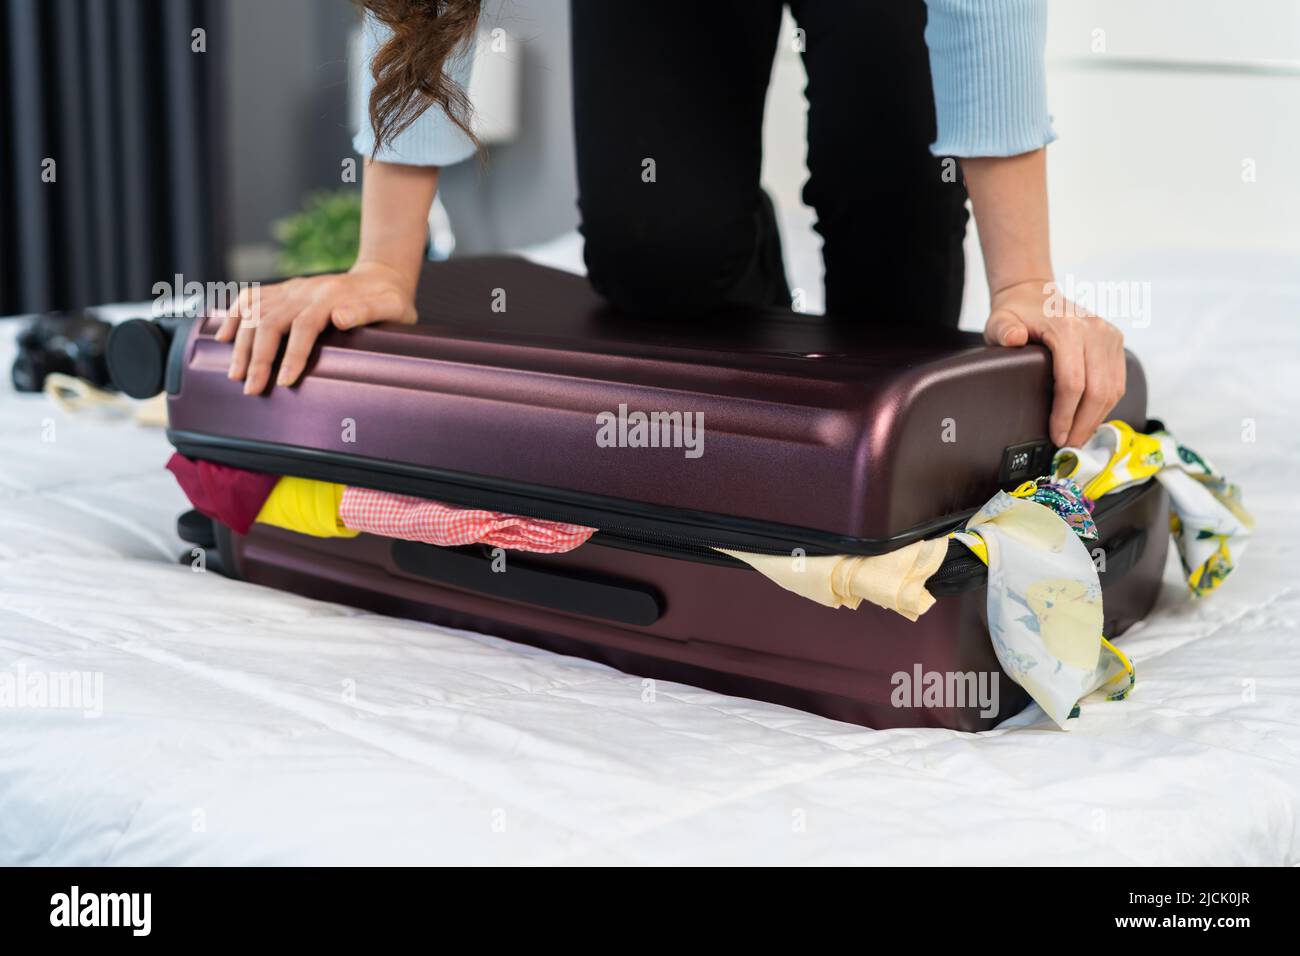 Woman packing overfilled suitcase -Fotos und -Bildmaterial in hoher  Auflösung – Alamy